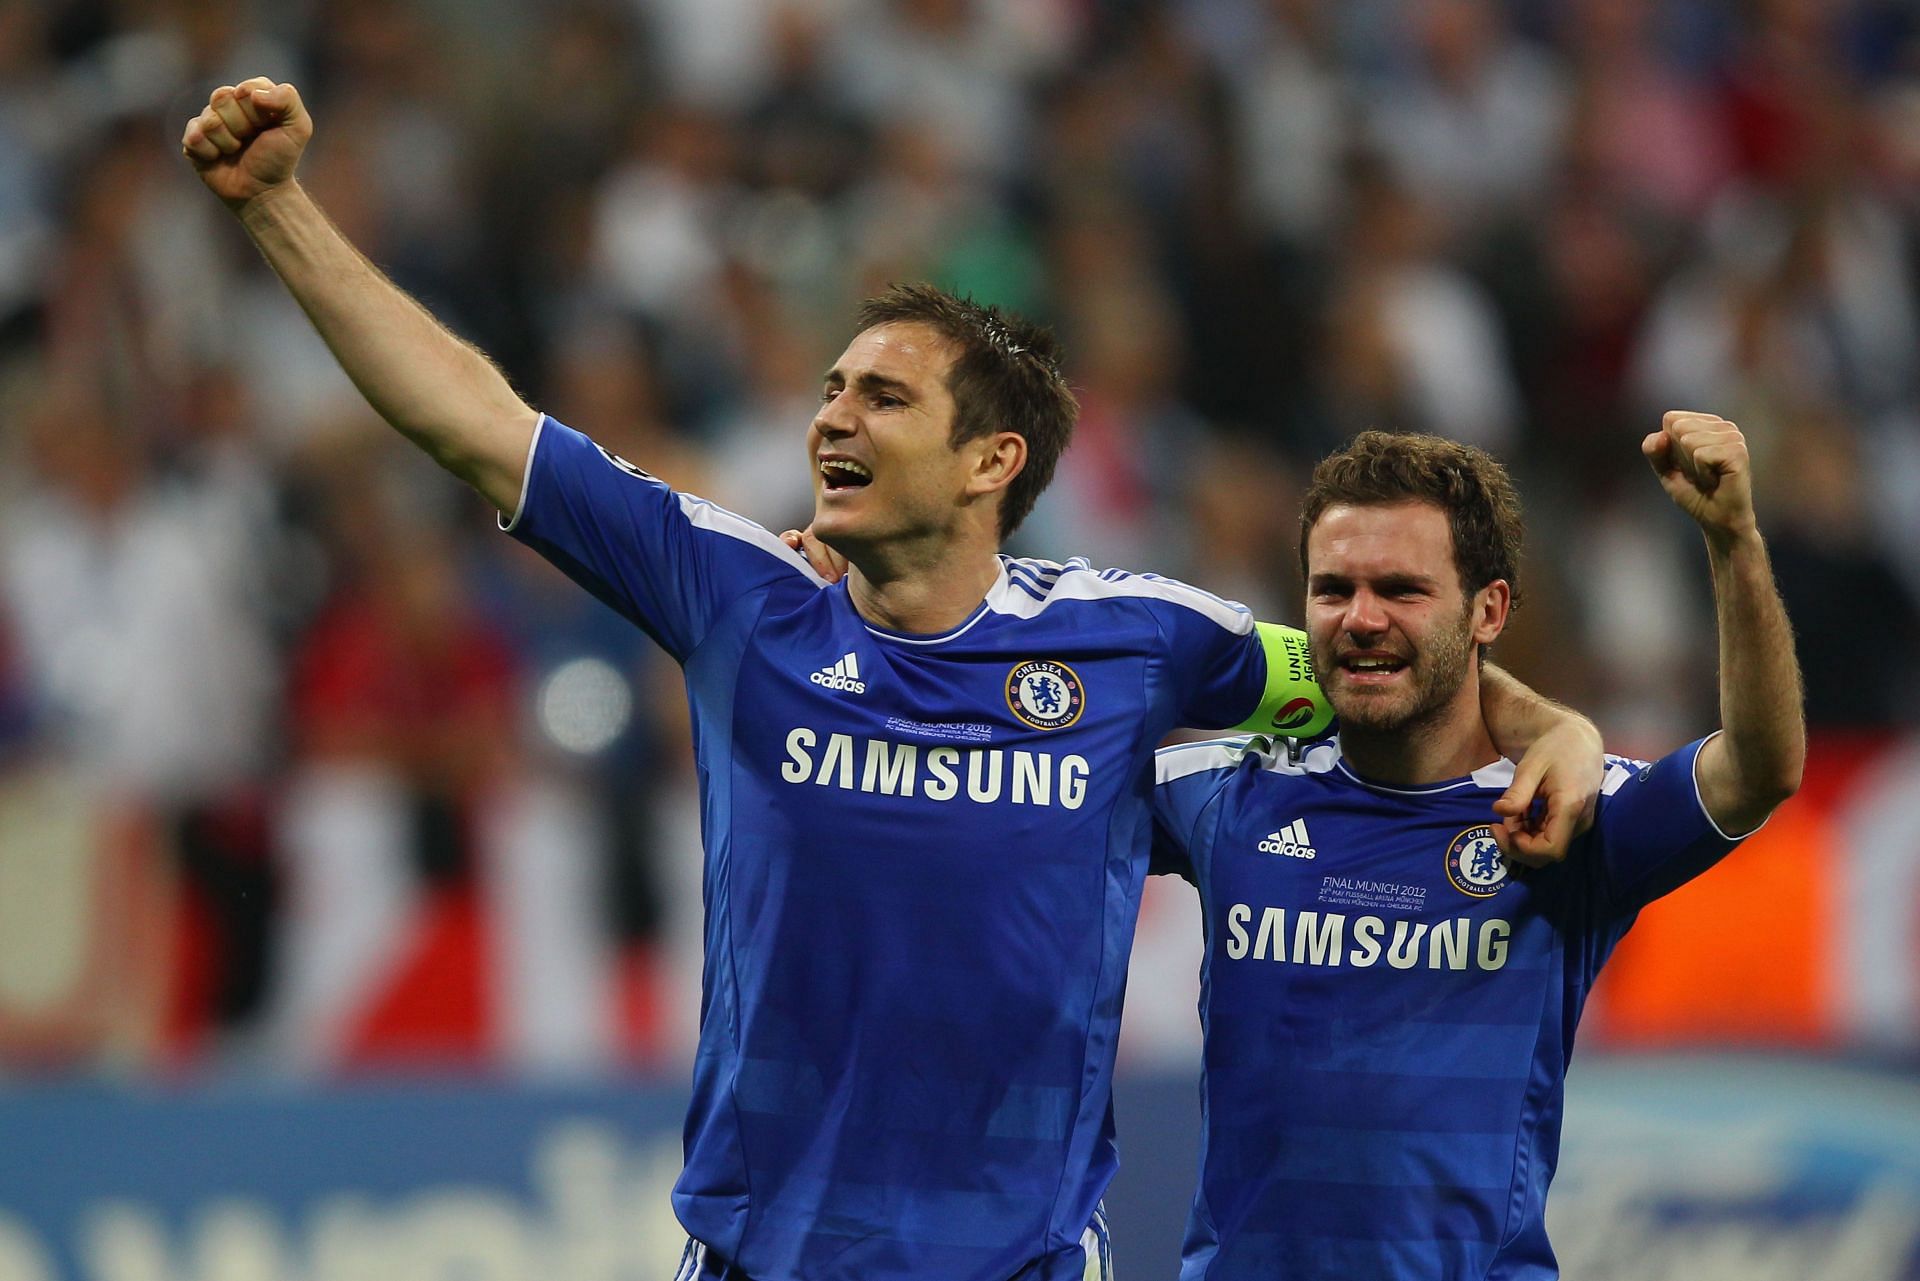 Juan Mata (right) won the Champions League with Chelsea